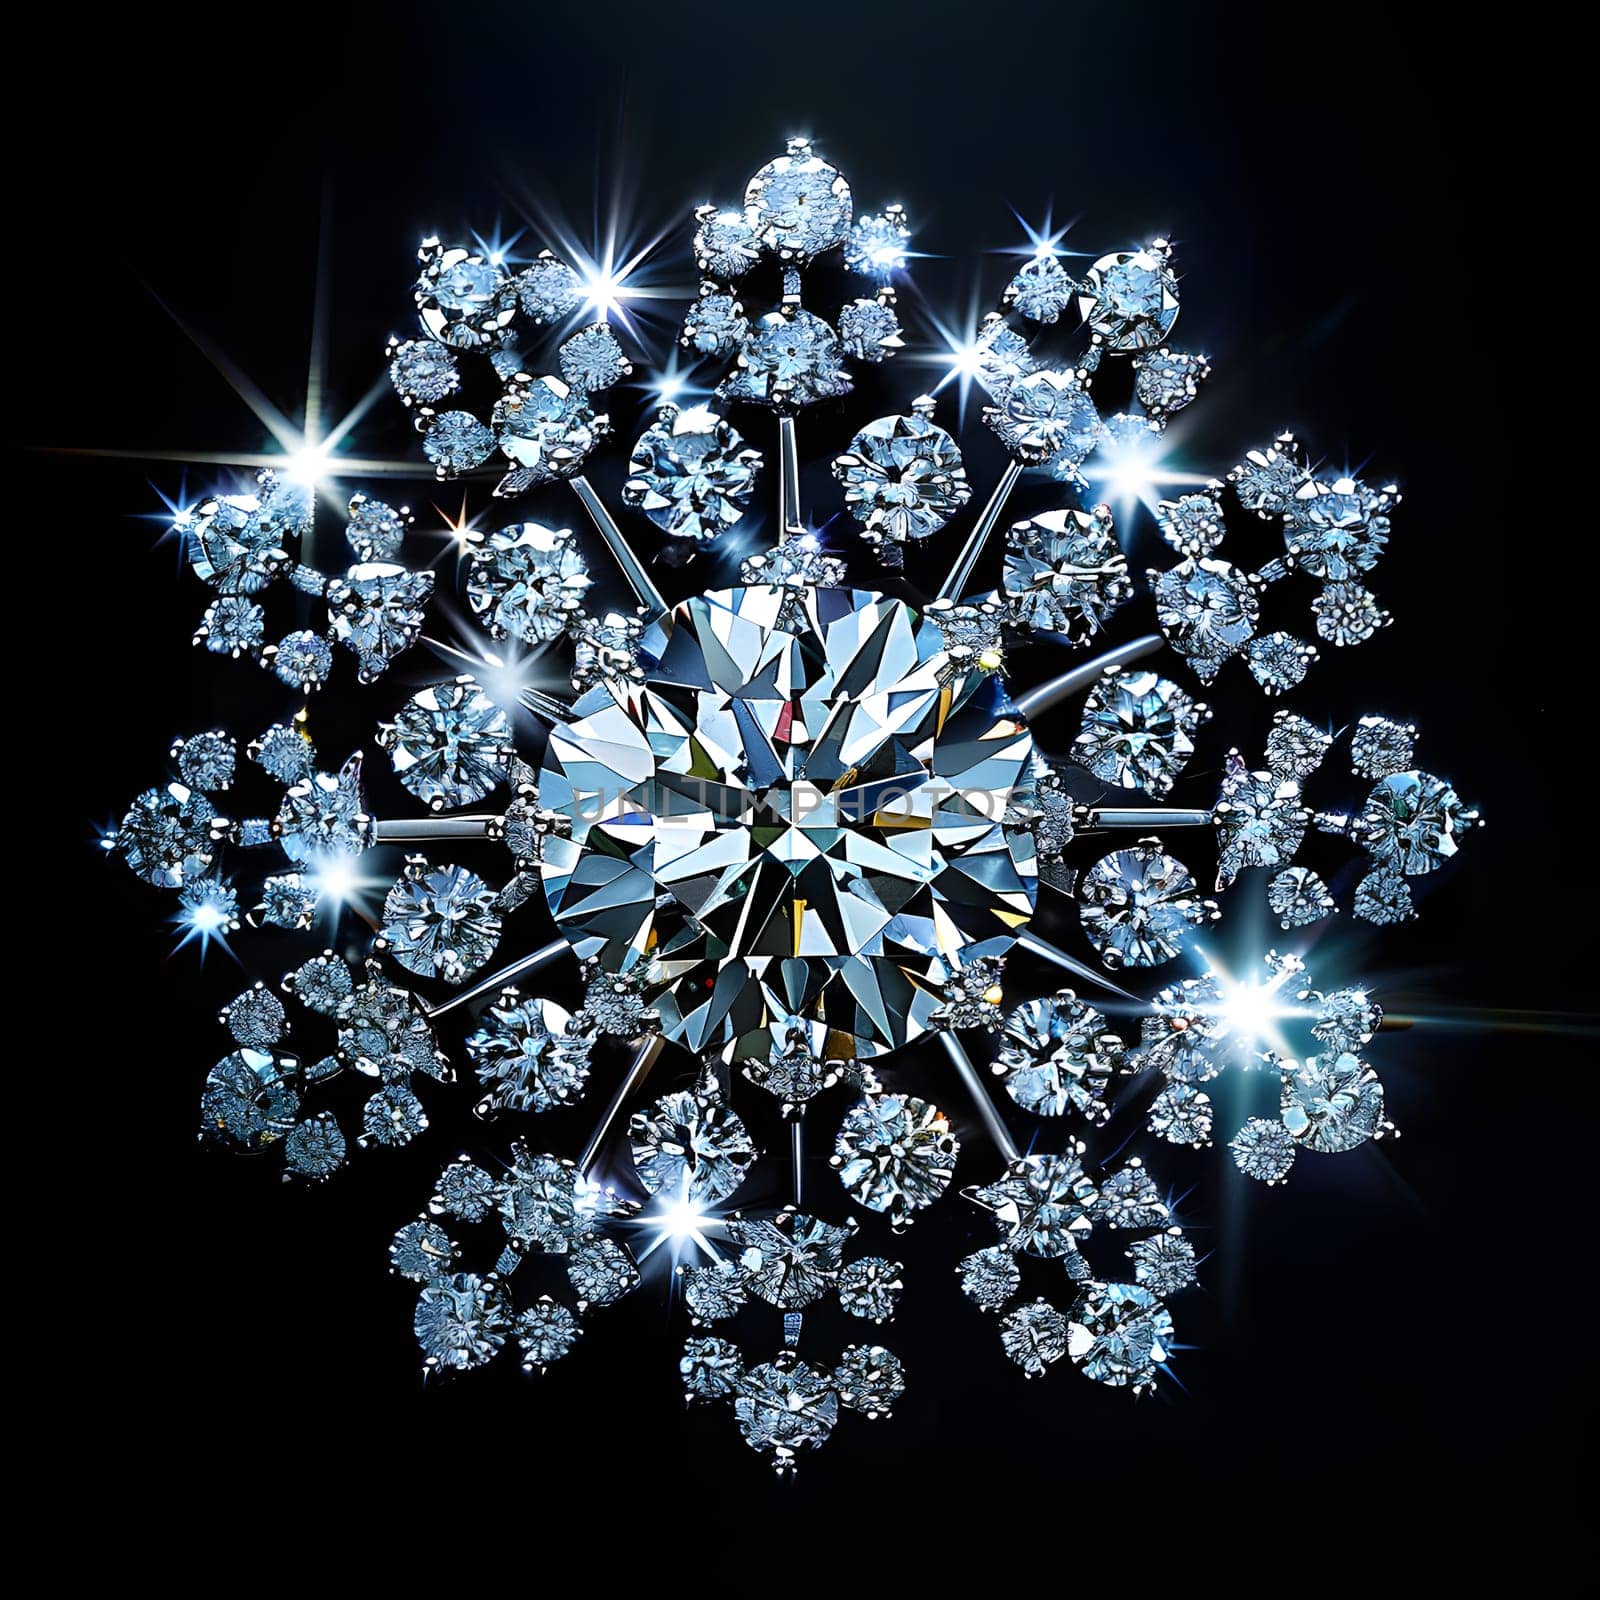 Diamond snowflake on black backdrop an artful display of symmetry and pattern by Nadtochiy